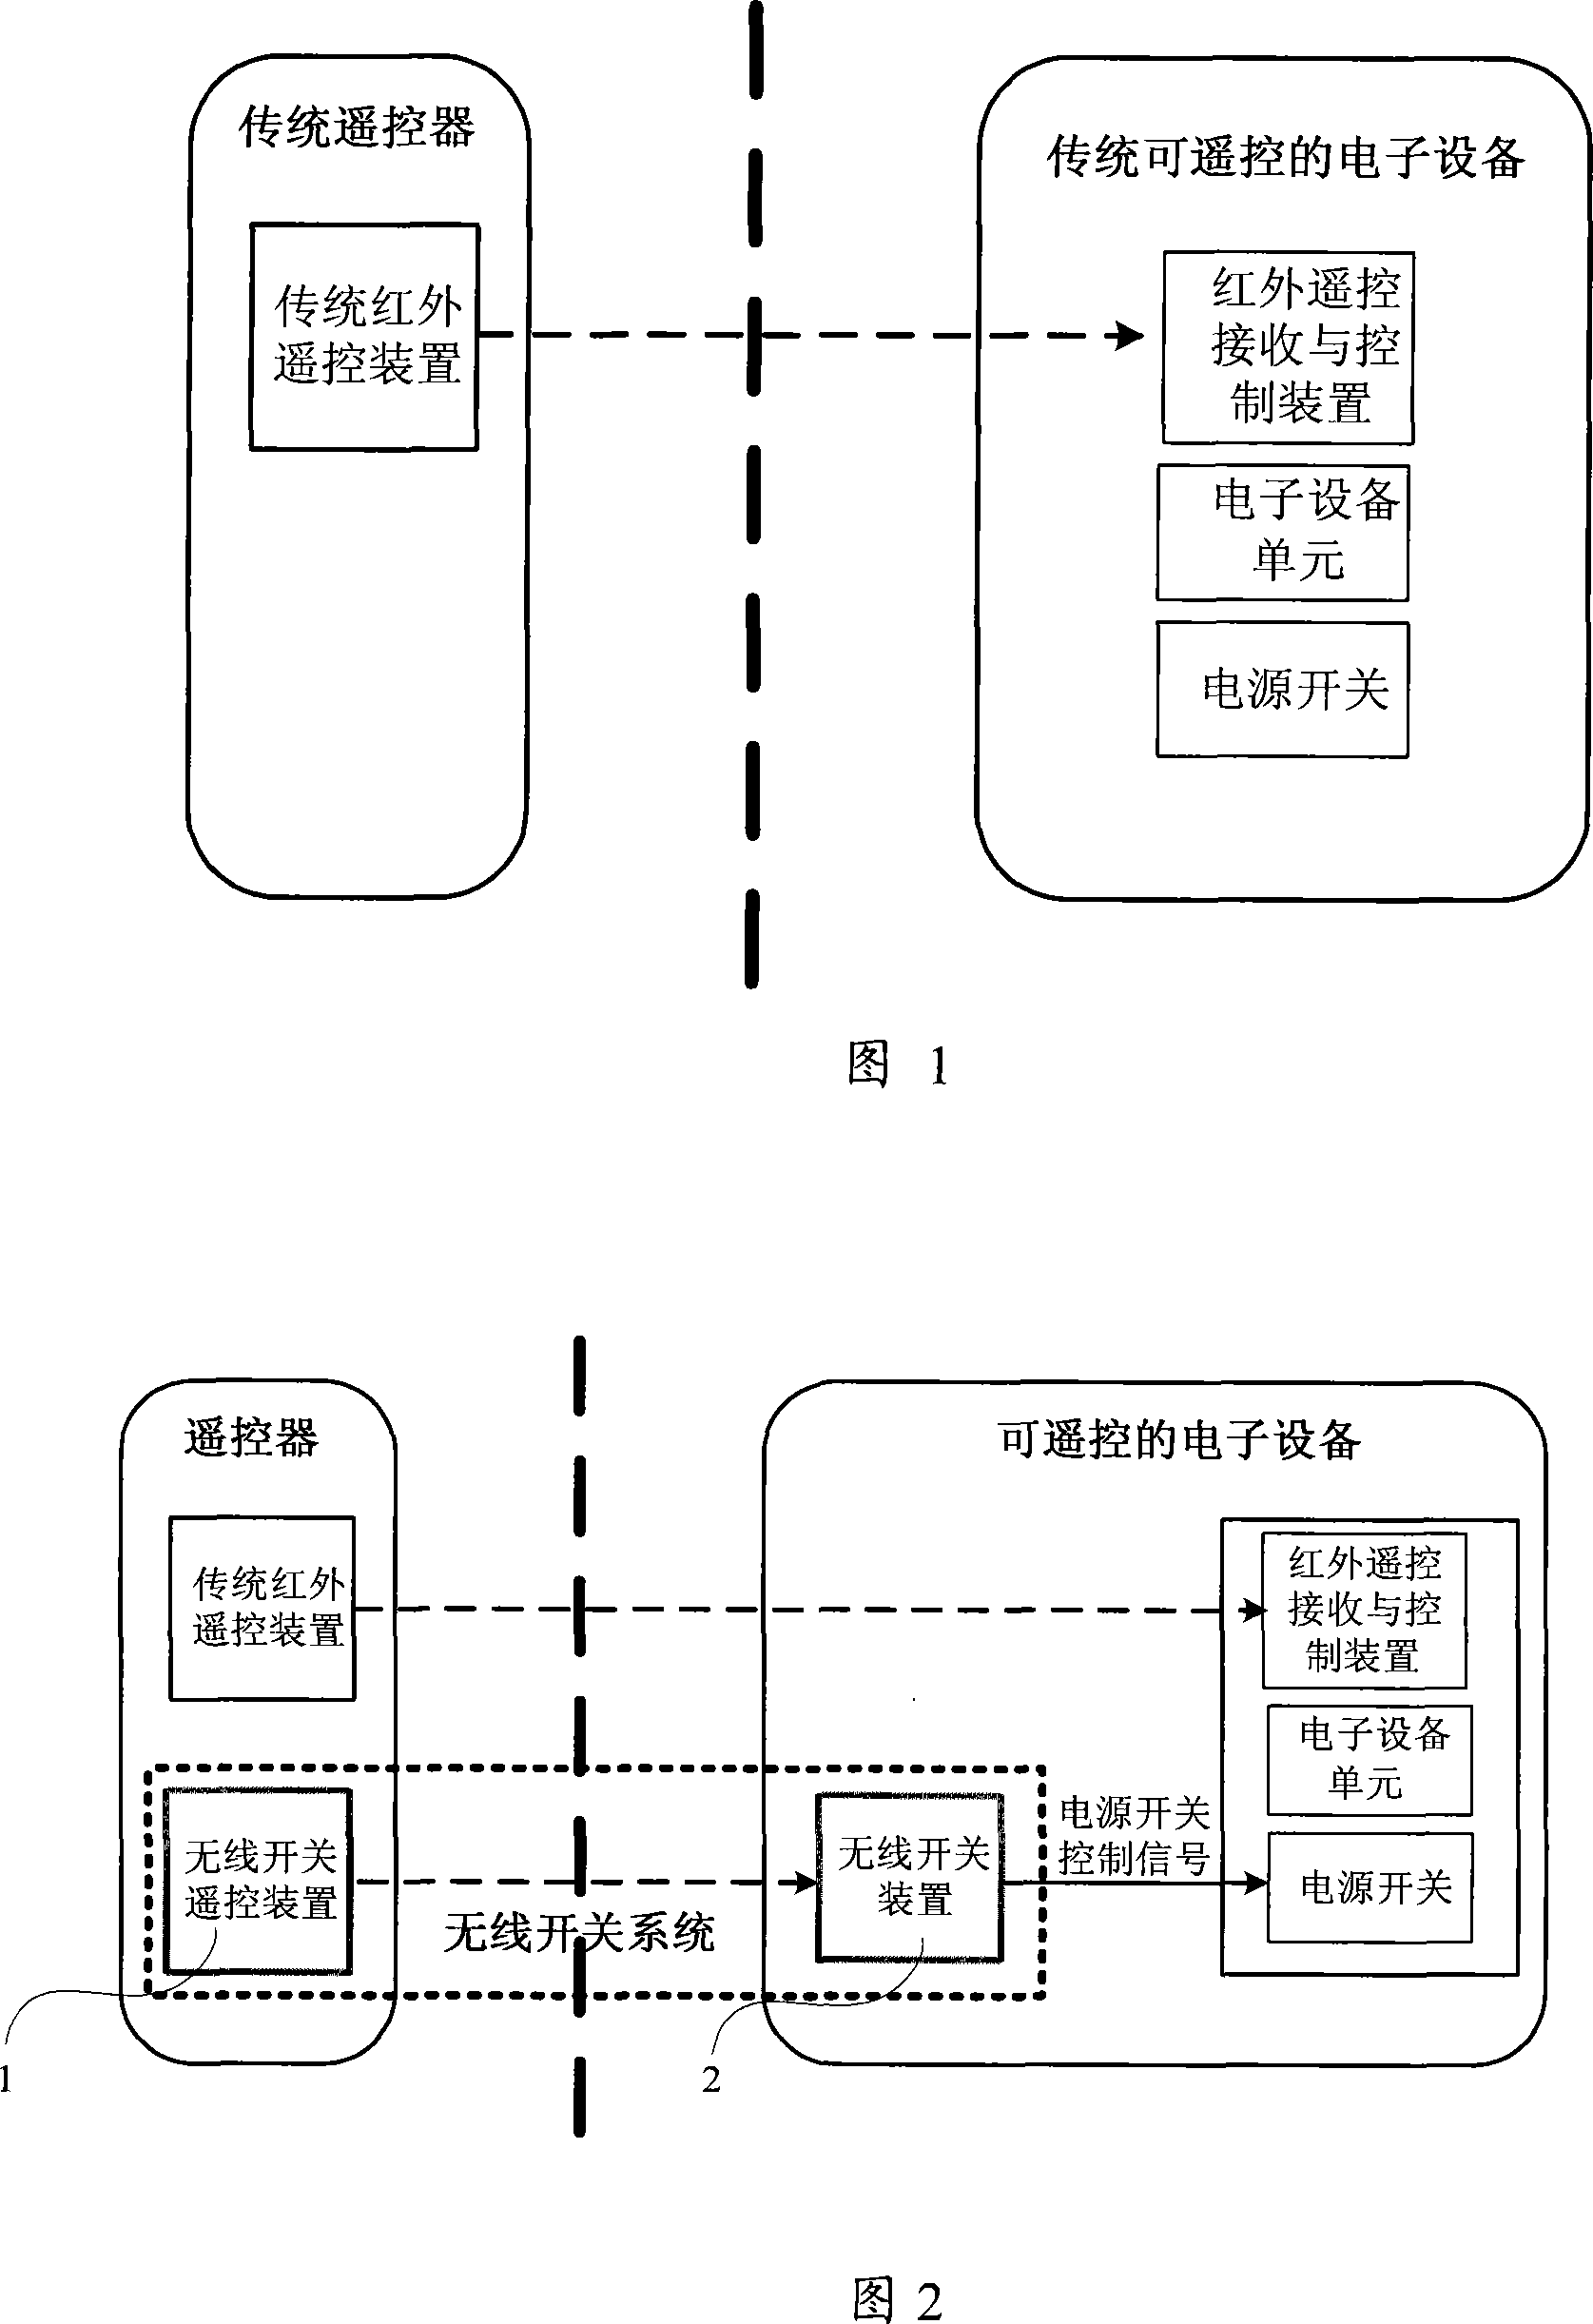 Wireless switch device, system and its communication control method